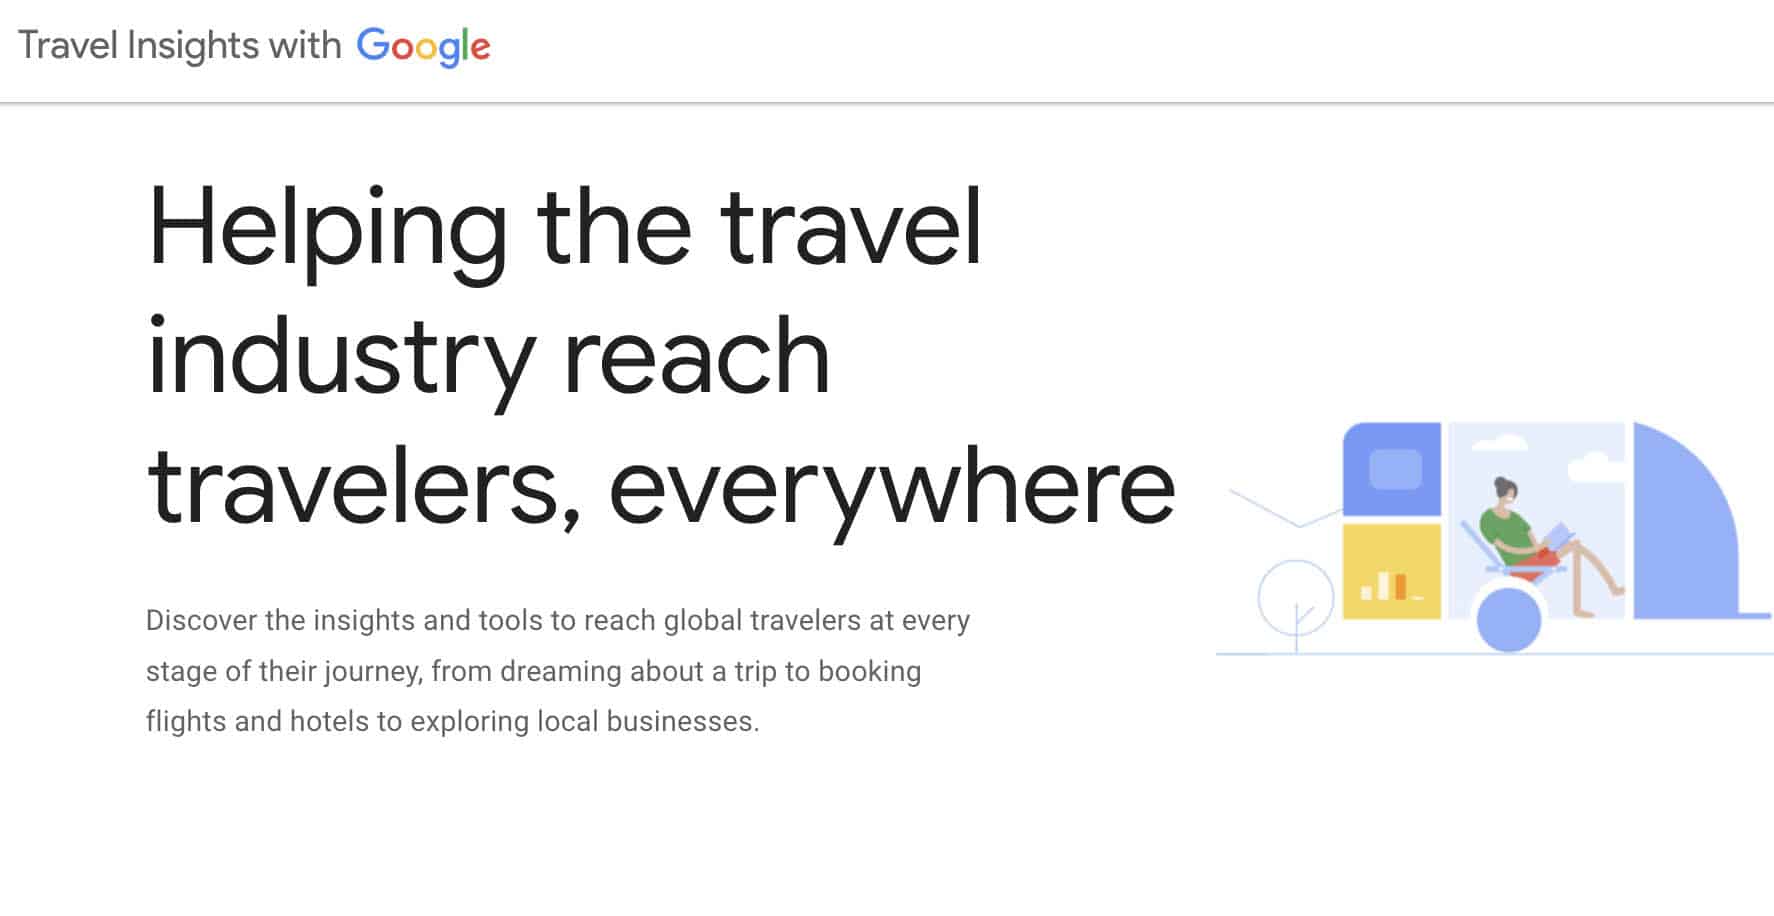 Travel Insights with Google